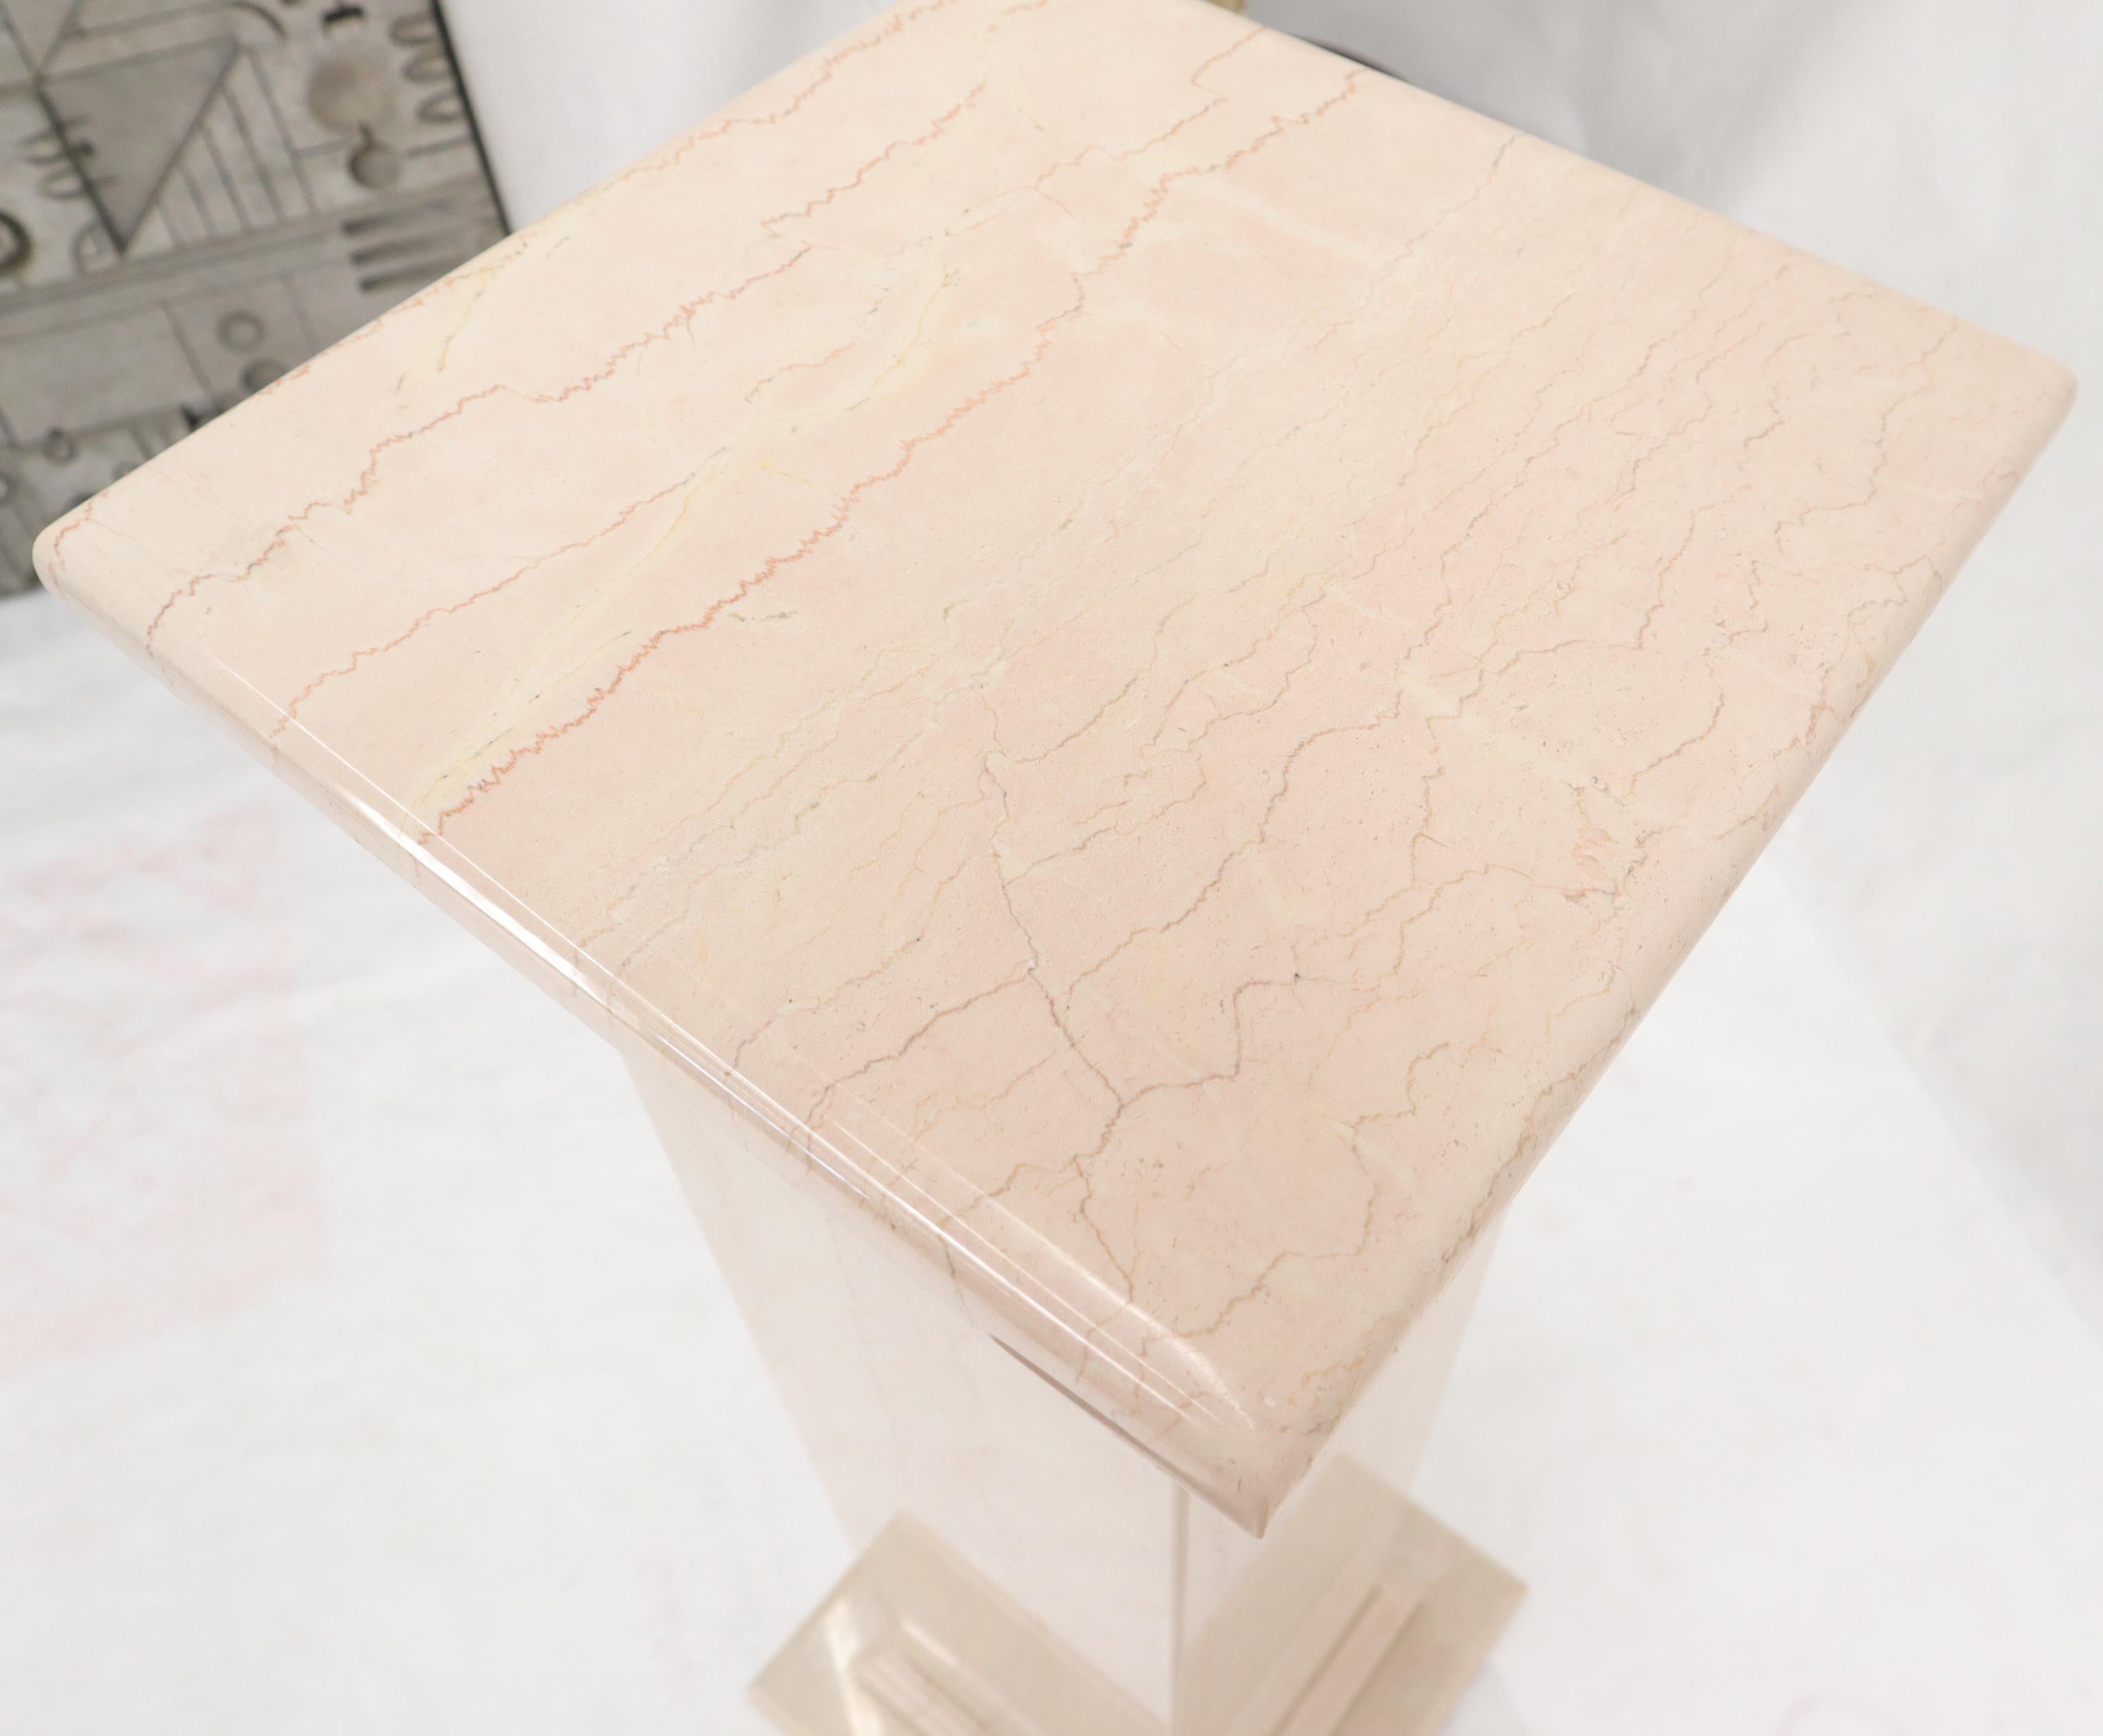 Polished Pale Pink to White Marble Square Pedestal Stand For Sale